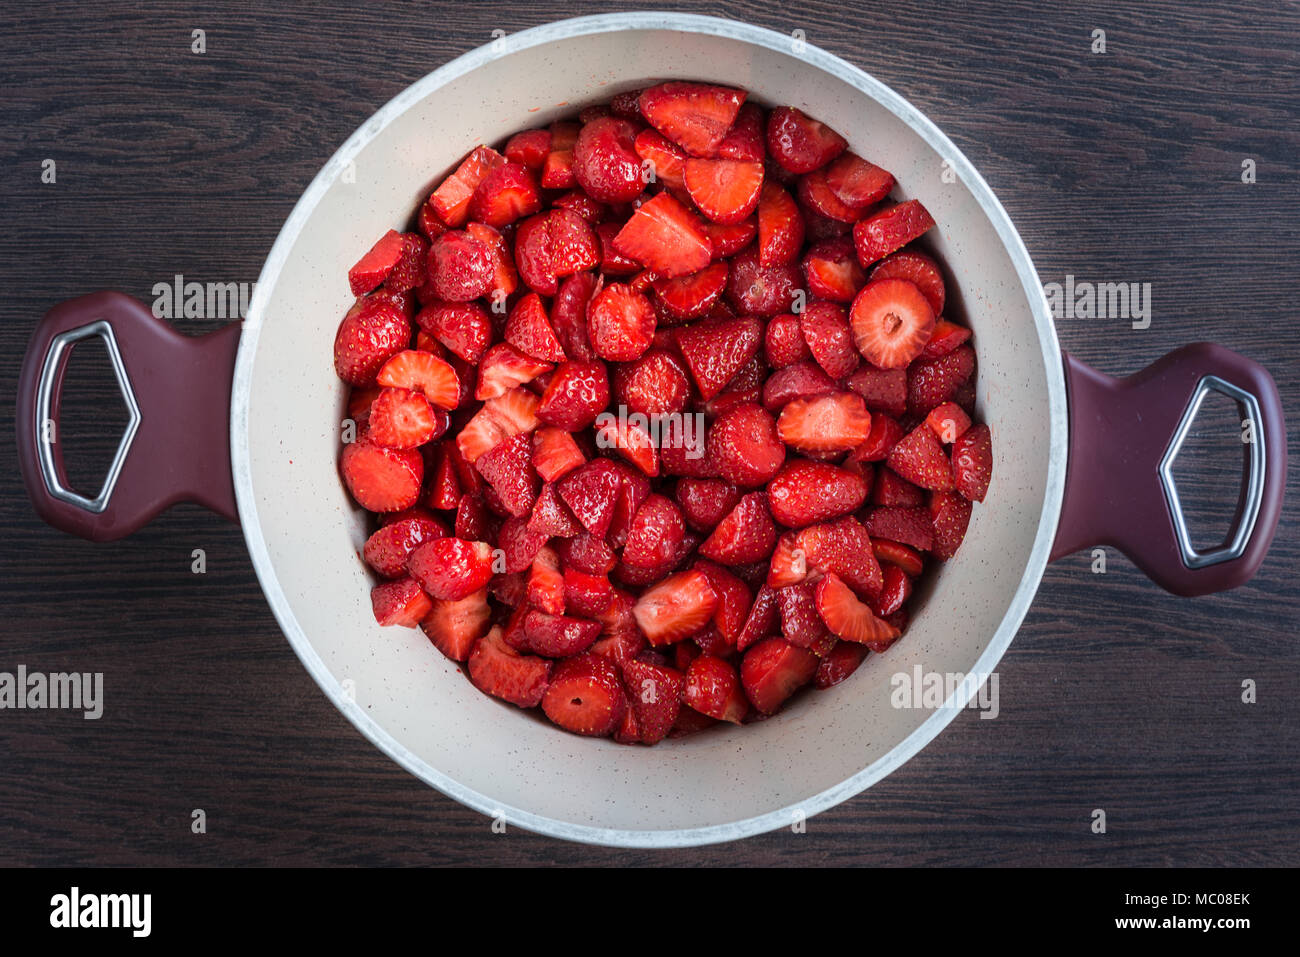 Top view of a pot with fresh strawberries cut in pieces, prepared for a strawberry jam cooking. Stock Photo